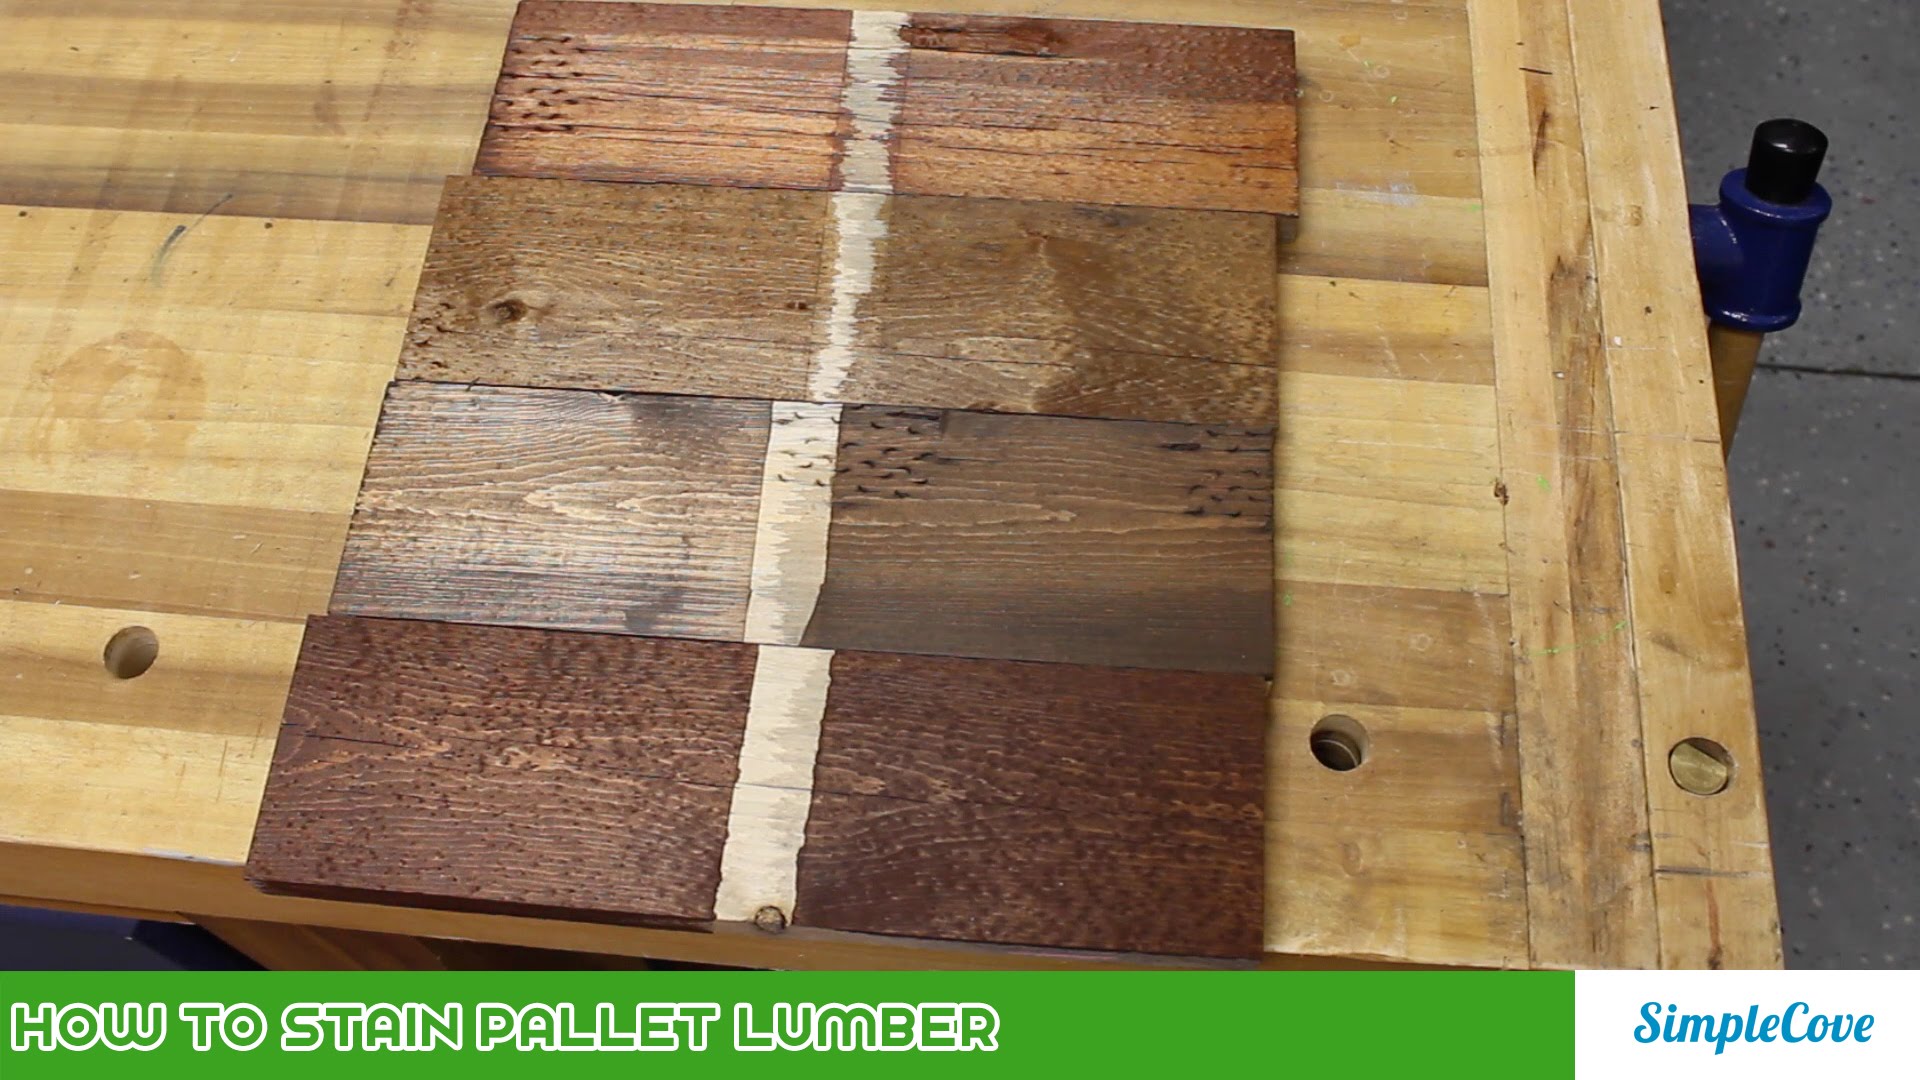 How To Stain Pallet Lumber - YouTube